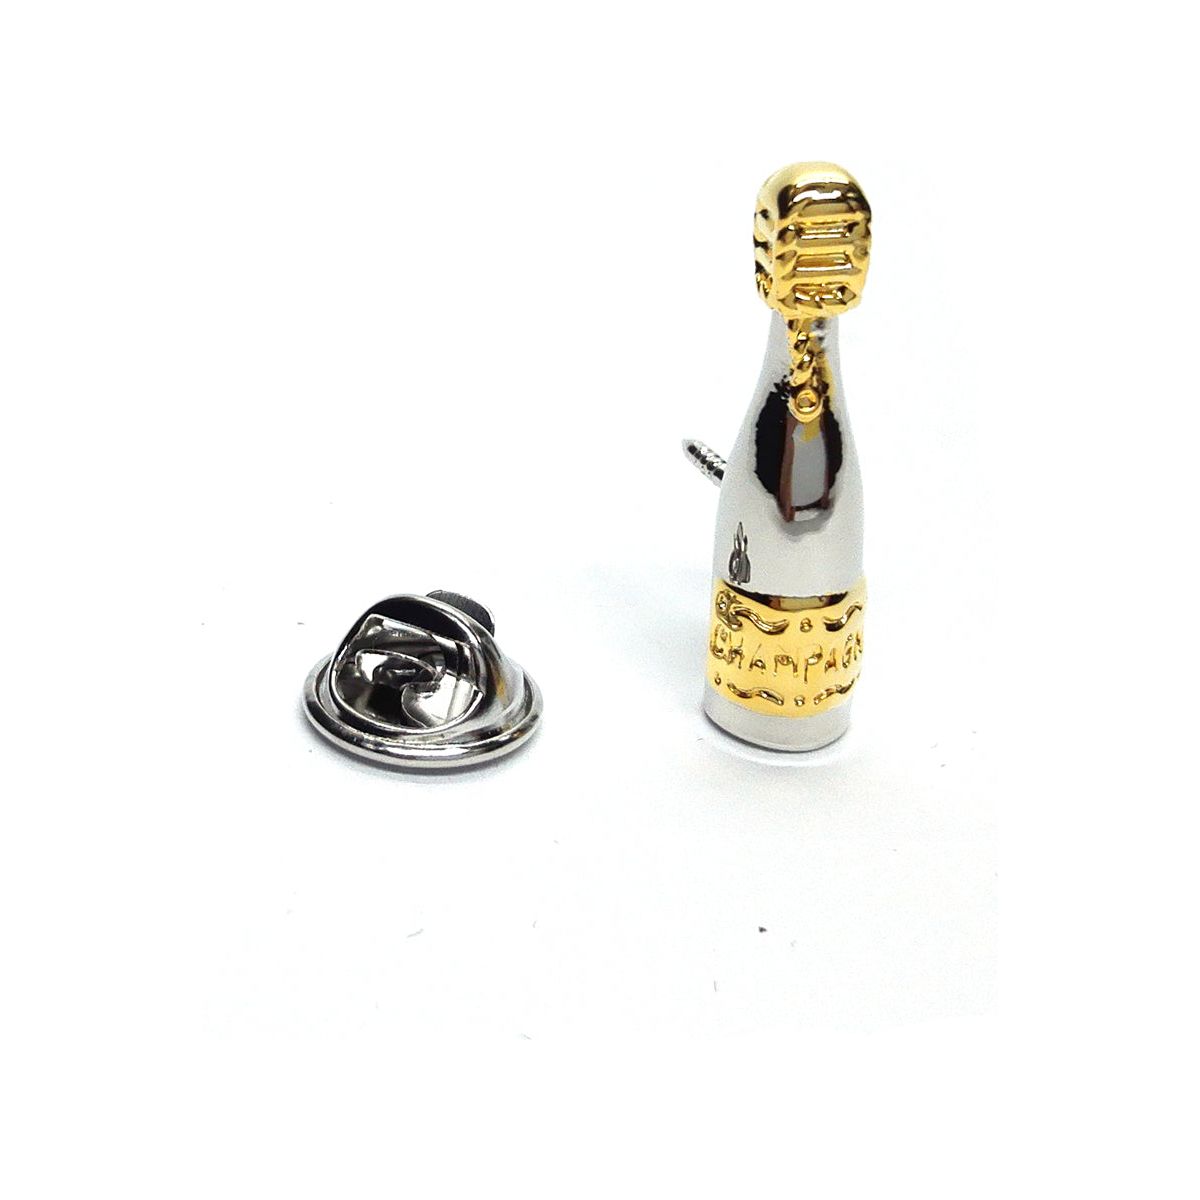 Two Tone Champagne Bottle Lapel Pin Badge - Ashton and Finch